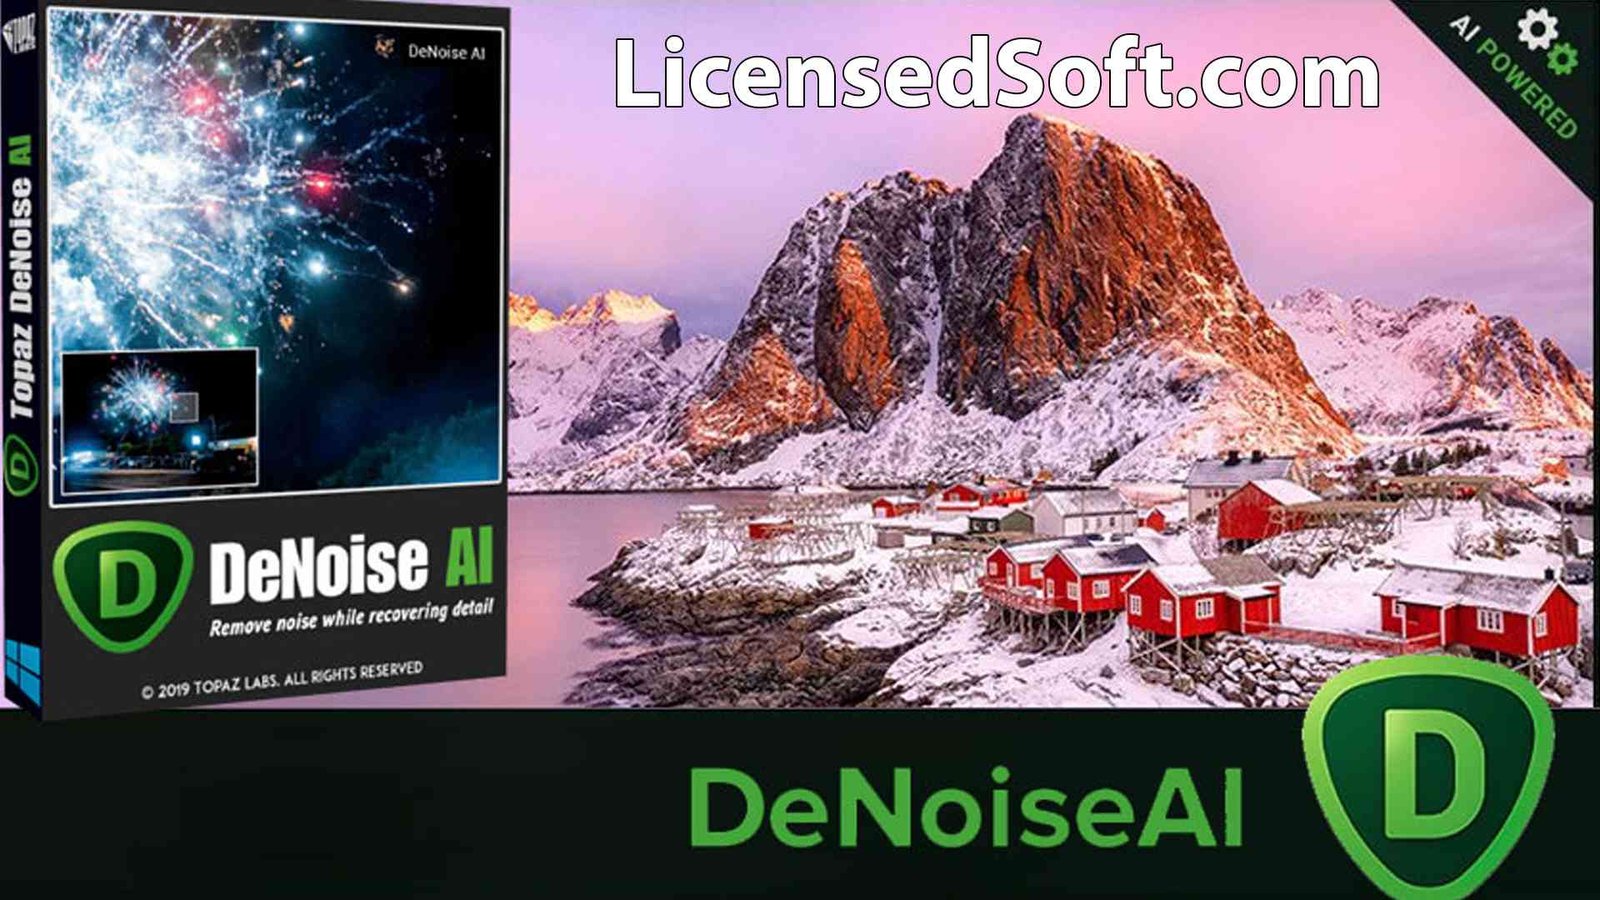 Topaz DeNoise AI 3.7.2 Full Version Cover Image By LicensedSoft